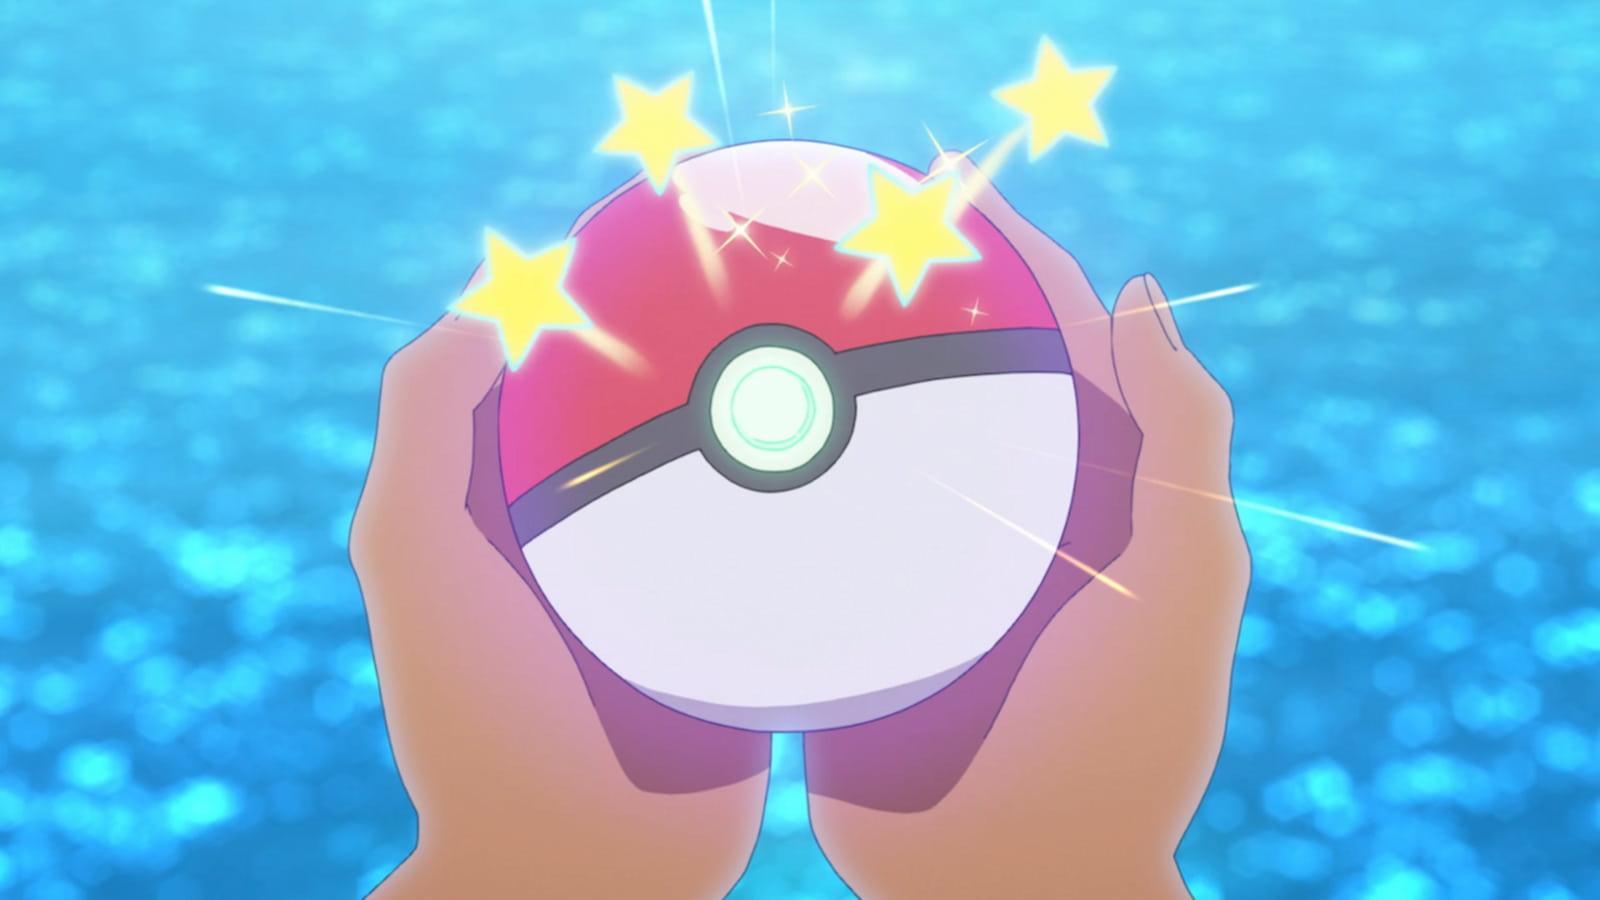 A Poke Ball with stars from the Pokemon anime